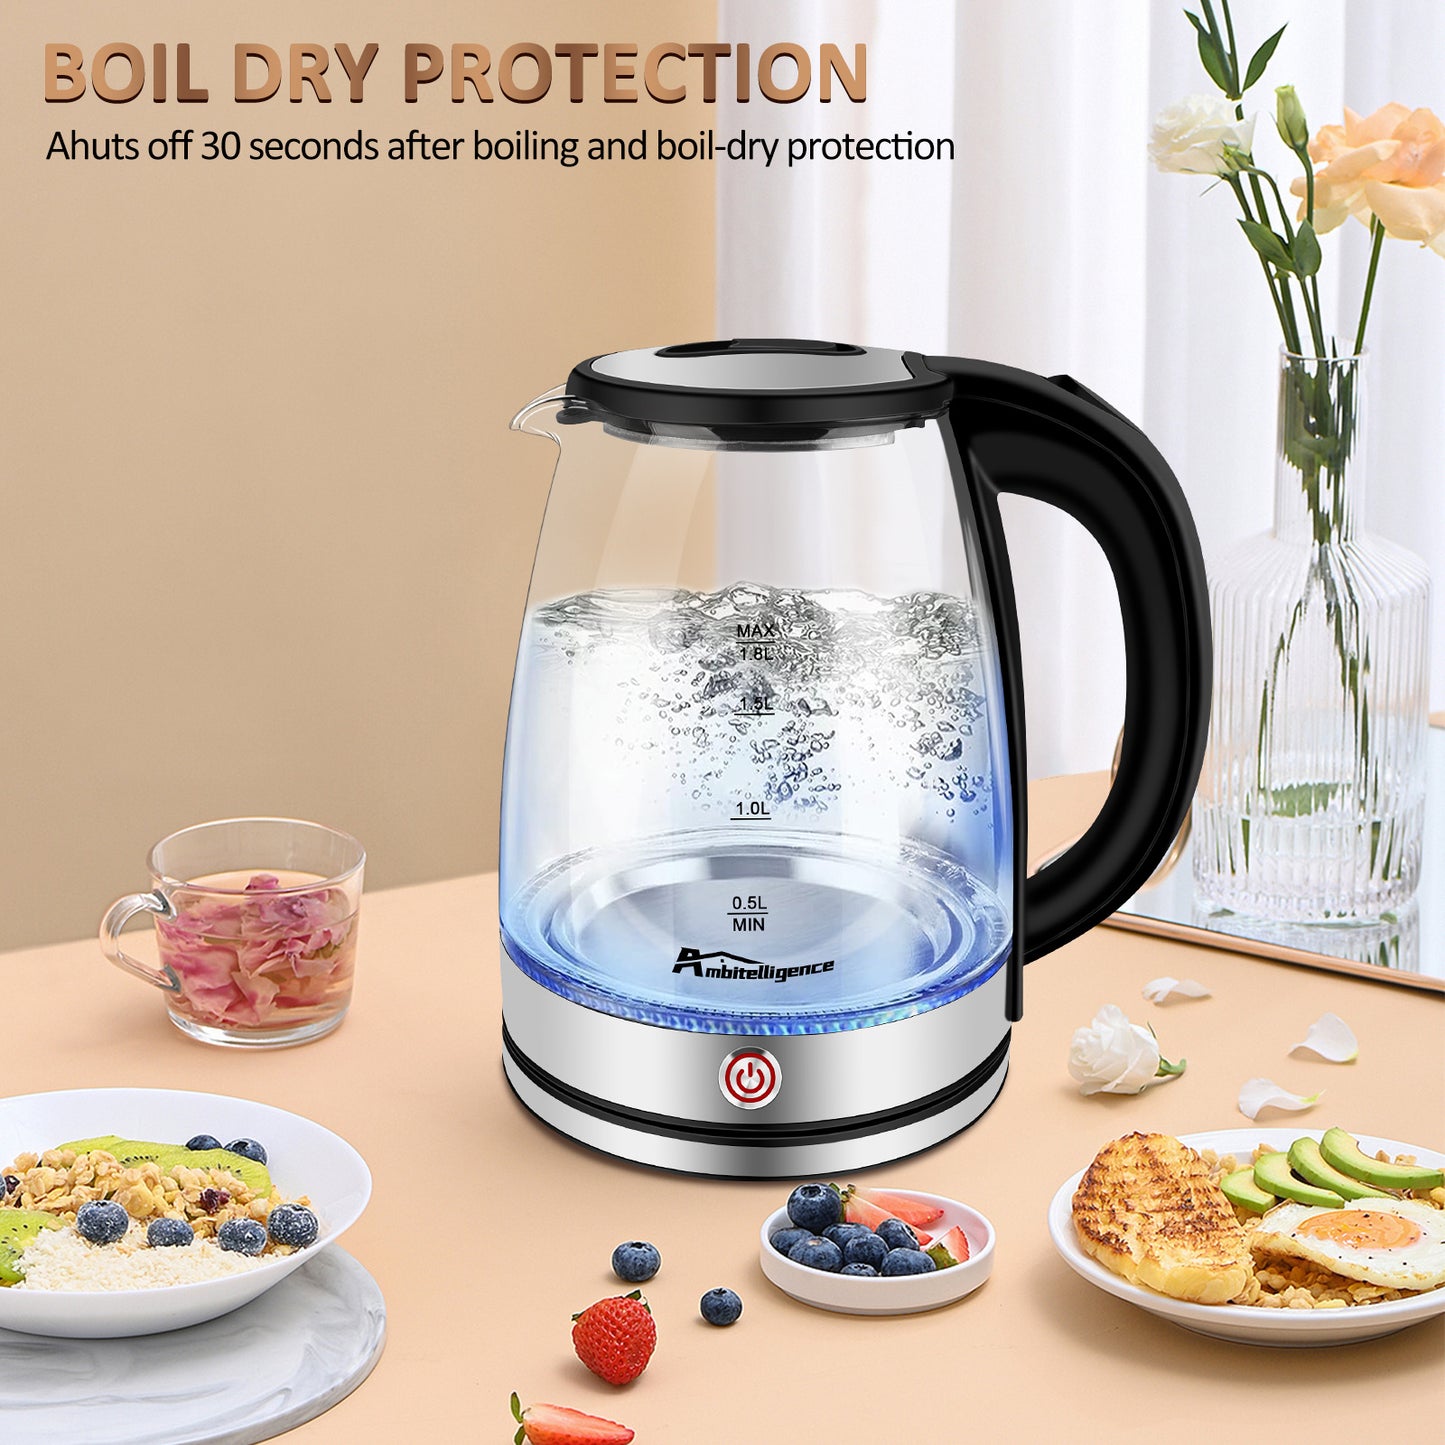 Electric Kettle Keep Warm, 1.8L Glass Tea Kettle, Hot Water Boiler With LED Light, Auto Shut-Off & Boil Dry Protection, Stainless Steel